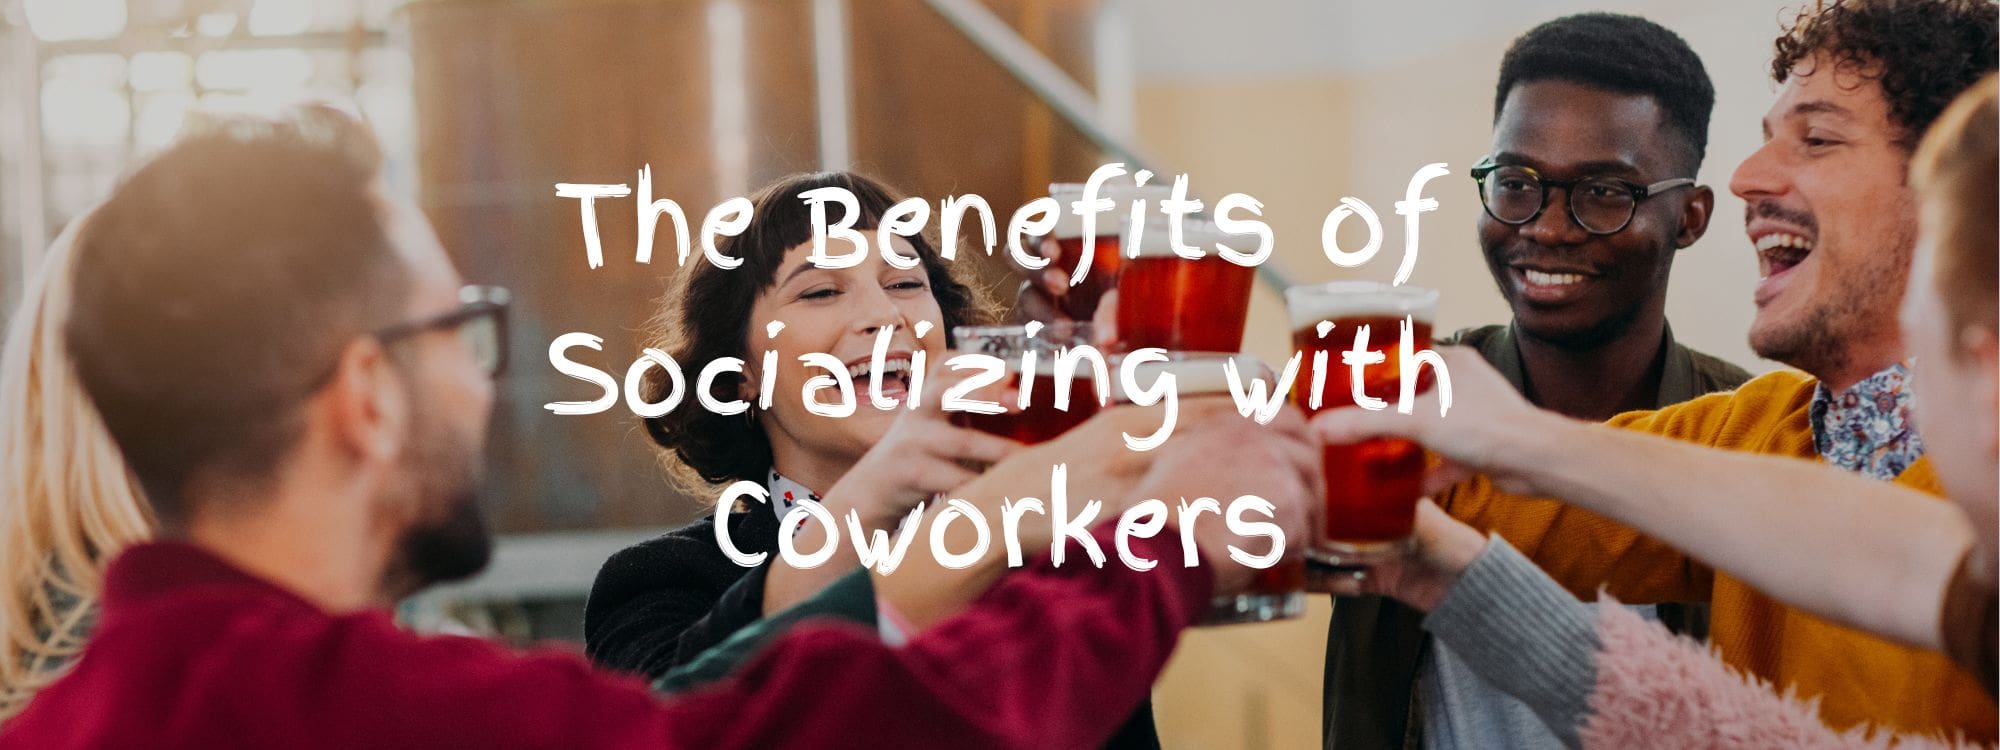 The Benefits of Socializing with Coworkers